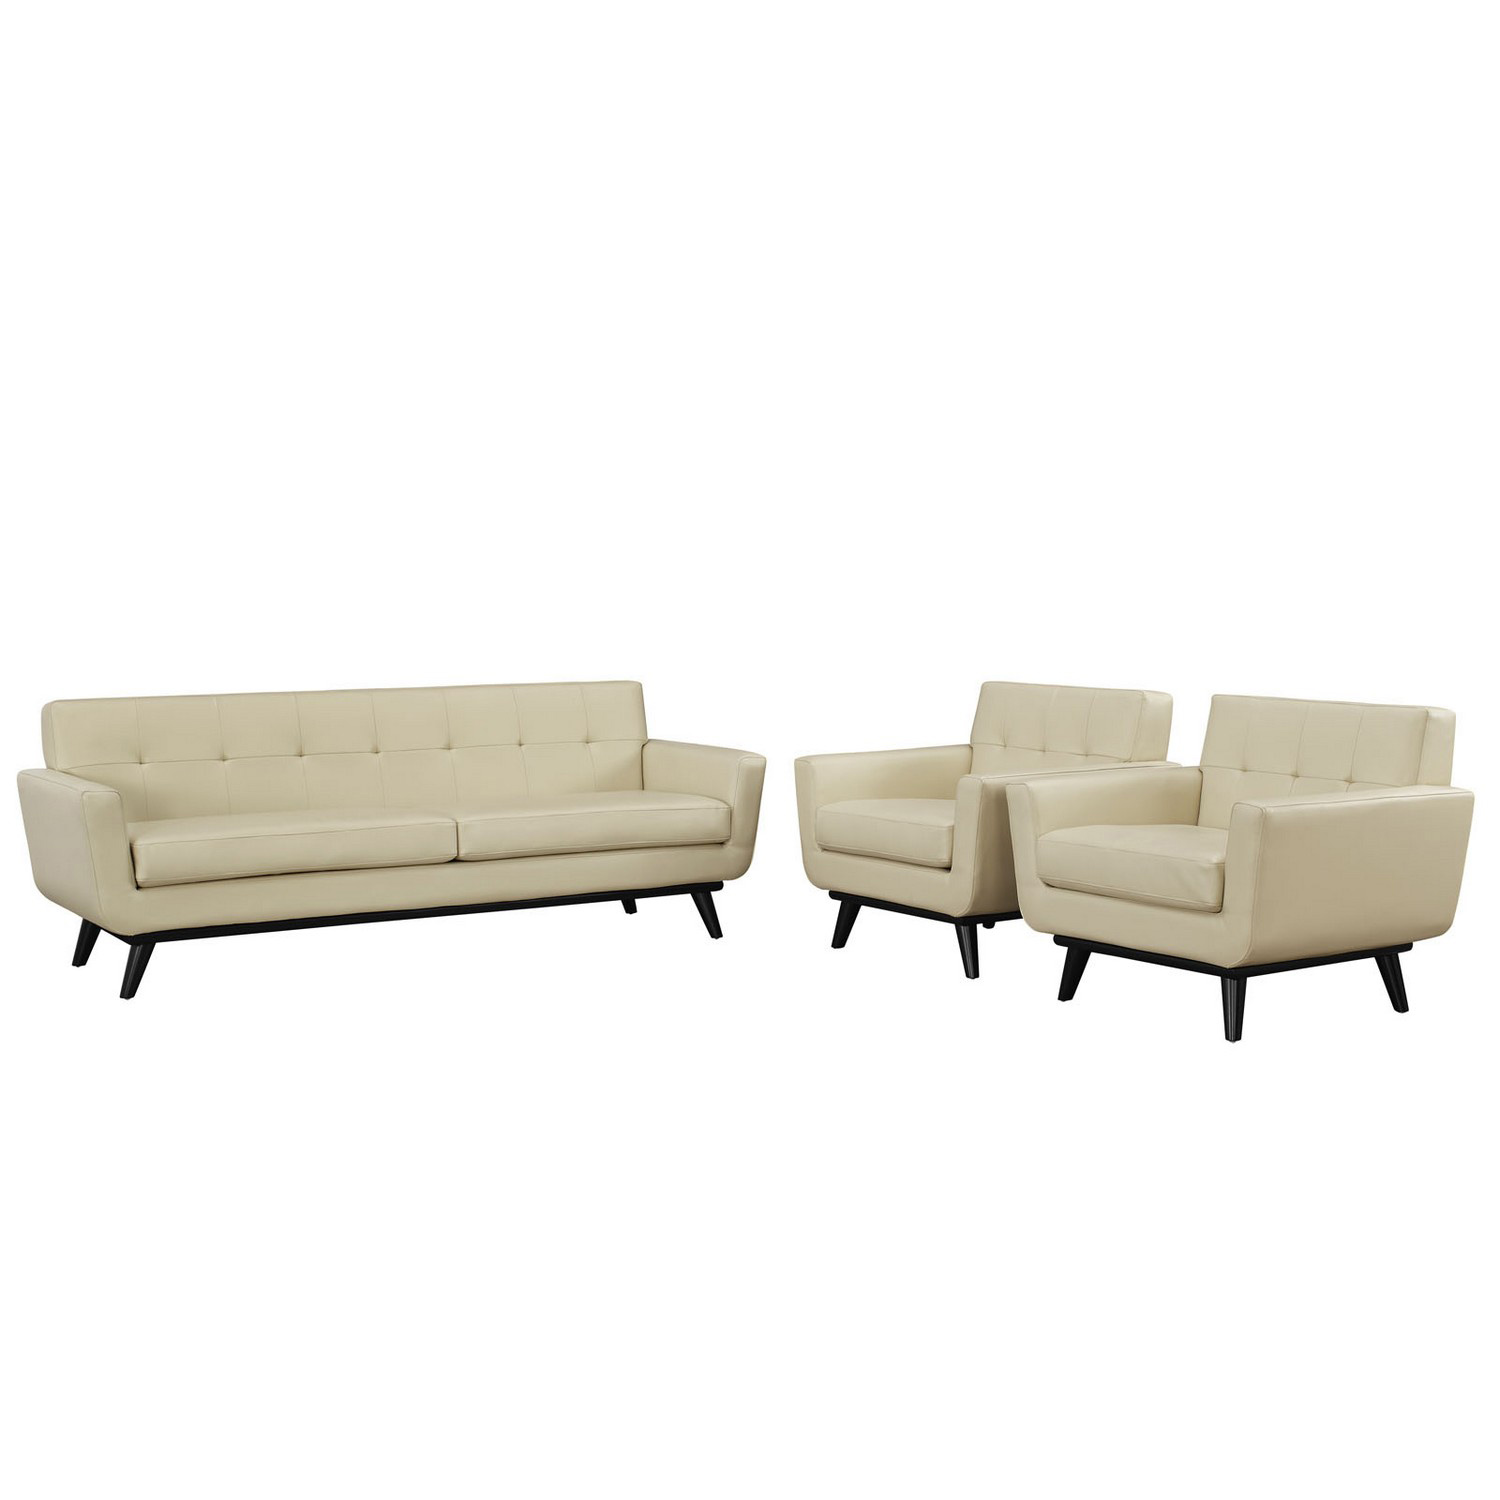 Modway Engage 3 Piece Leather Living Room Set - Beige